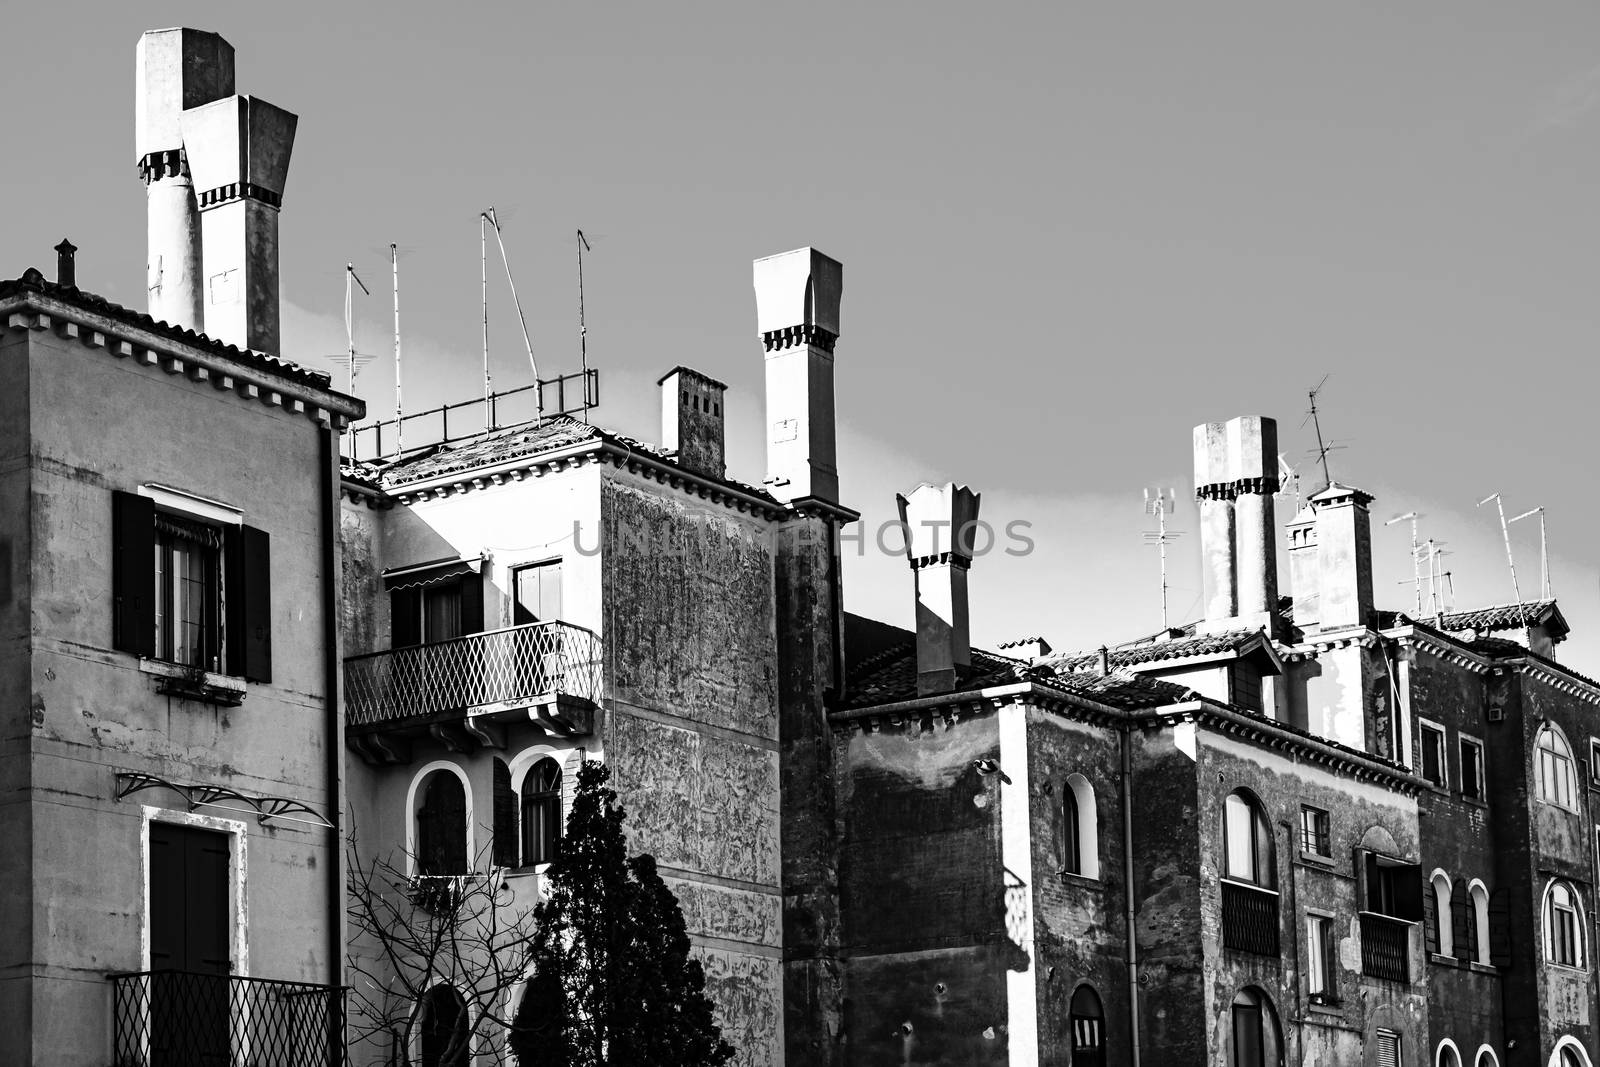 Italian culture on Venetian facades in black and white. Venice is rich and poor, well-groomed and abandoned, reflected in its windows.